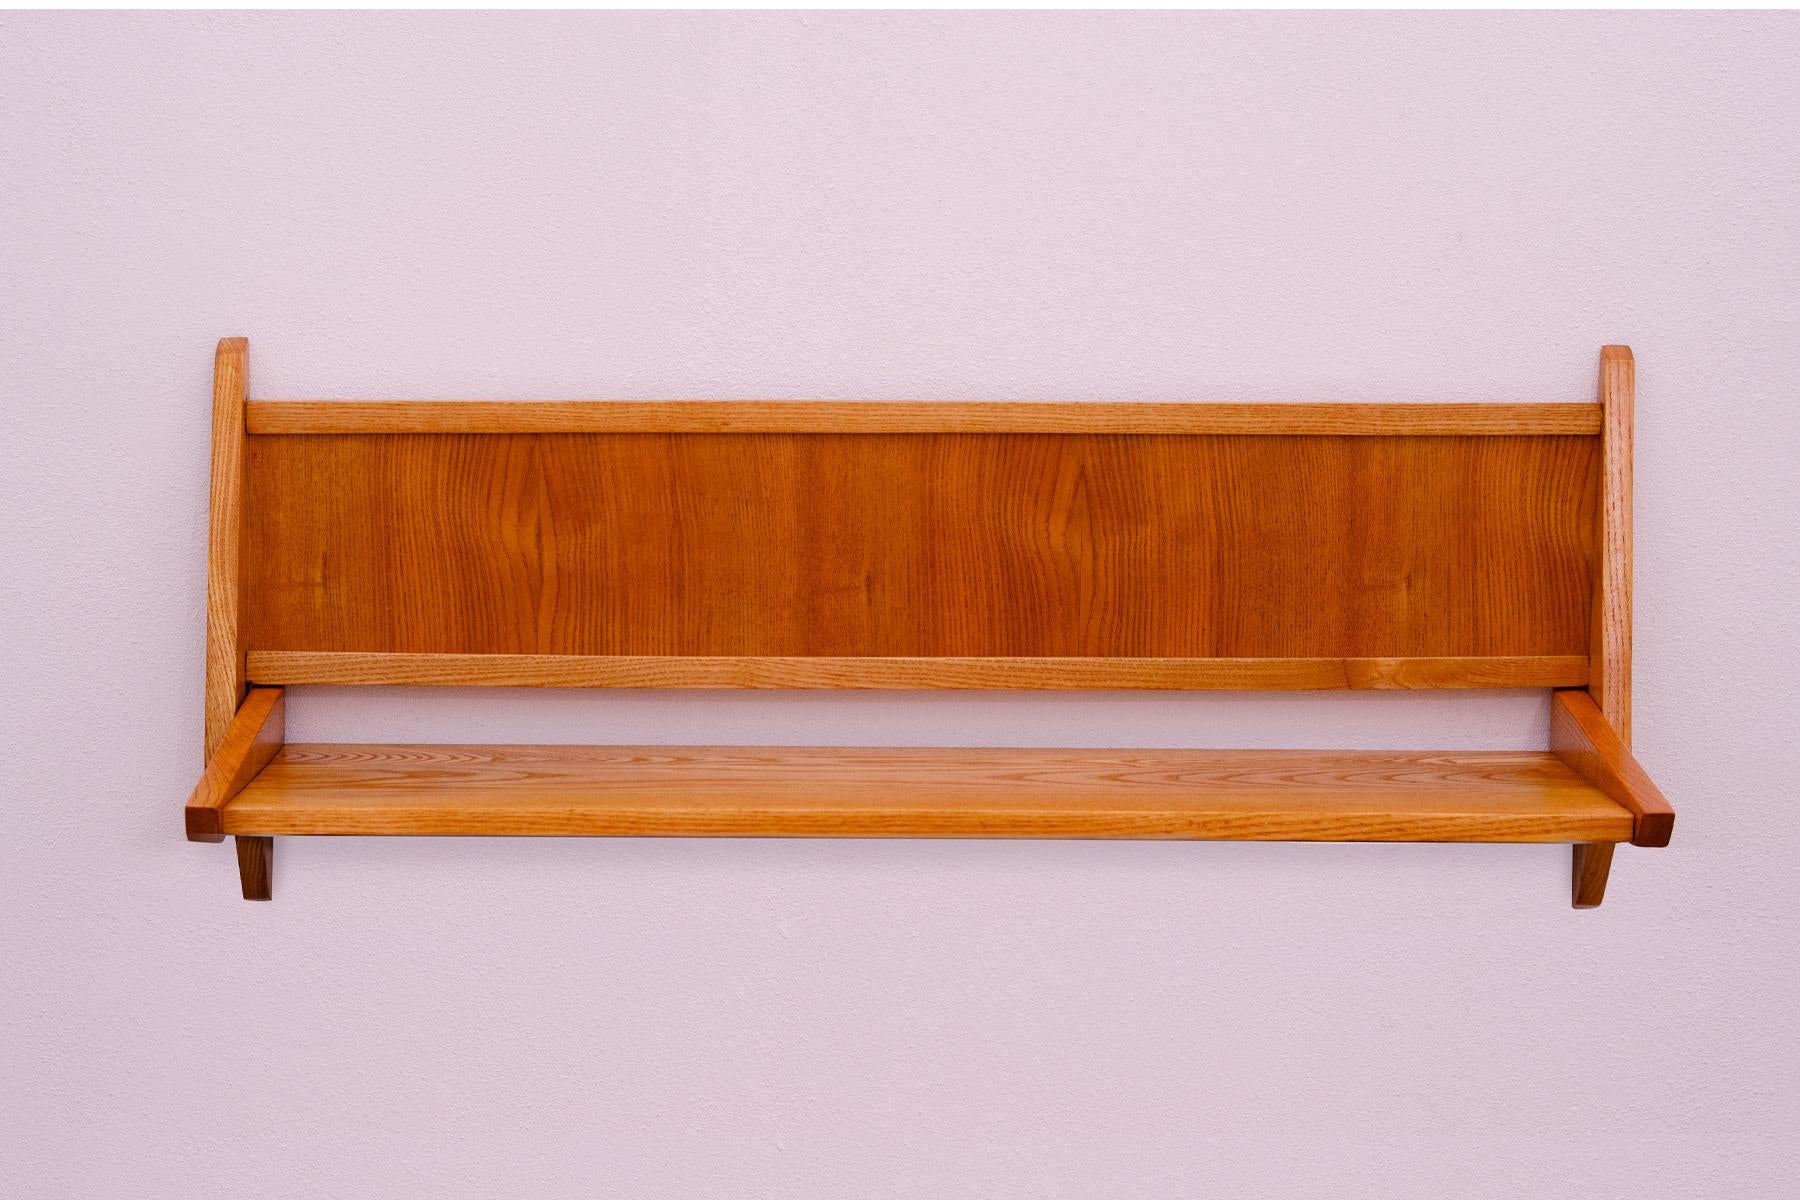 Mid century wooden shelf made by ULUV company in the former Czechoslovakia in the 1960´s.
It´s made of beech wood.
In very good Vintage condition.

 

Height: 30 cm

width: 74 cm

depth: 22 cm